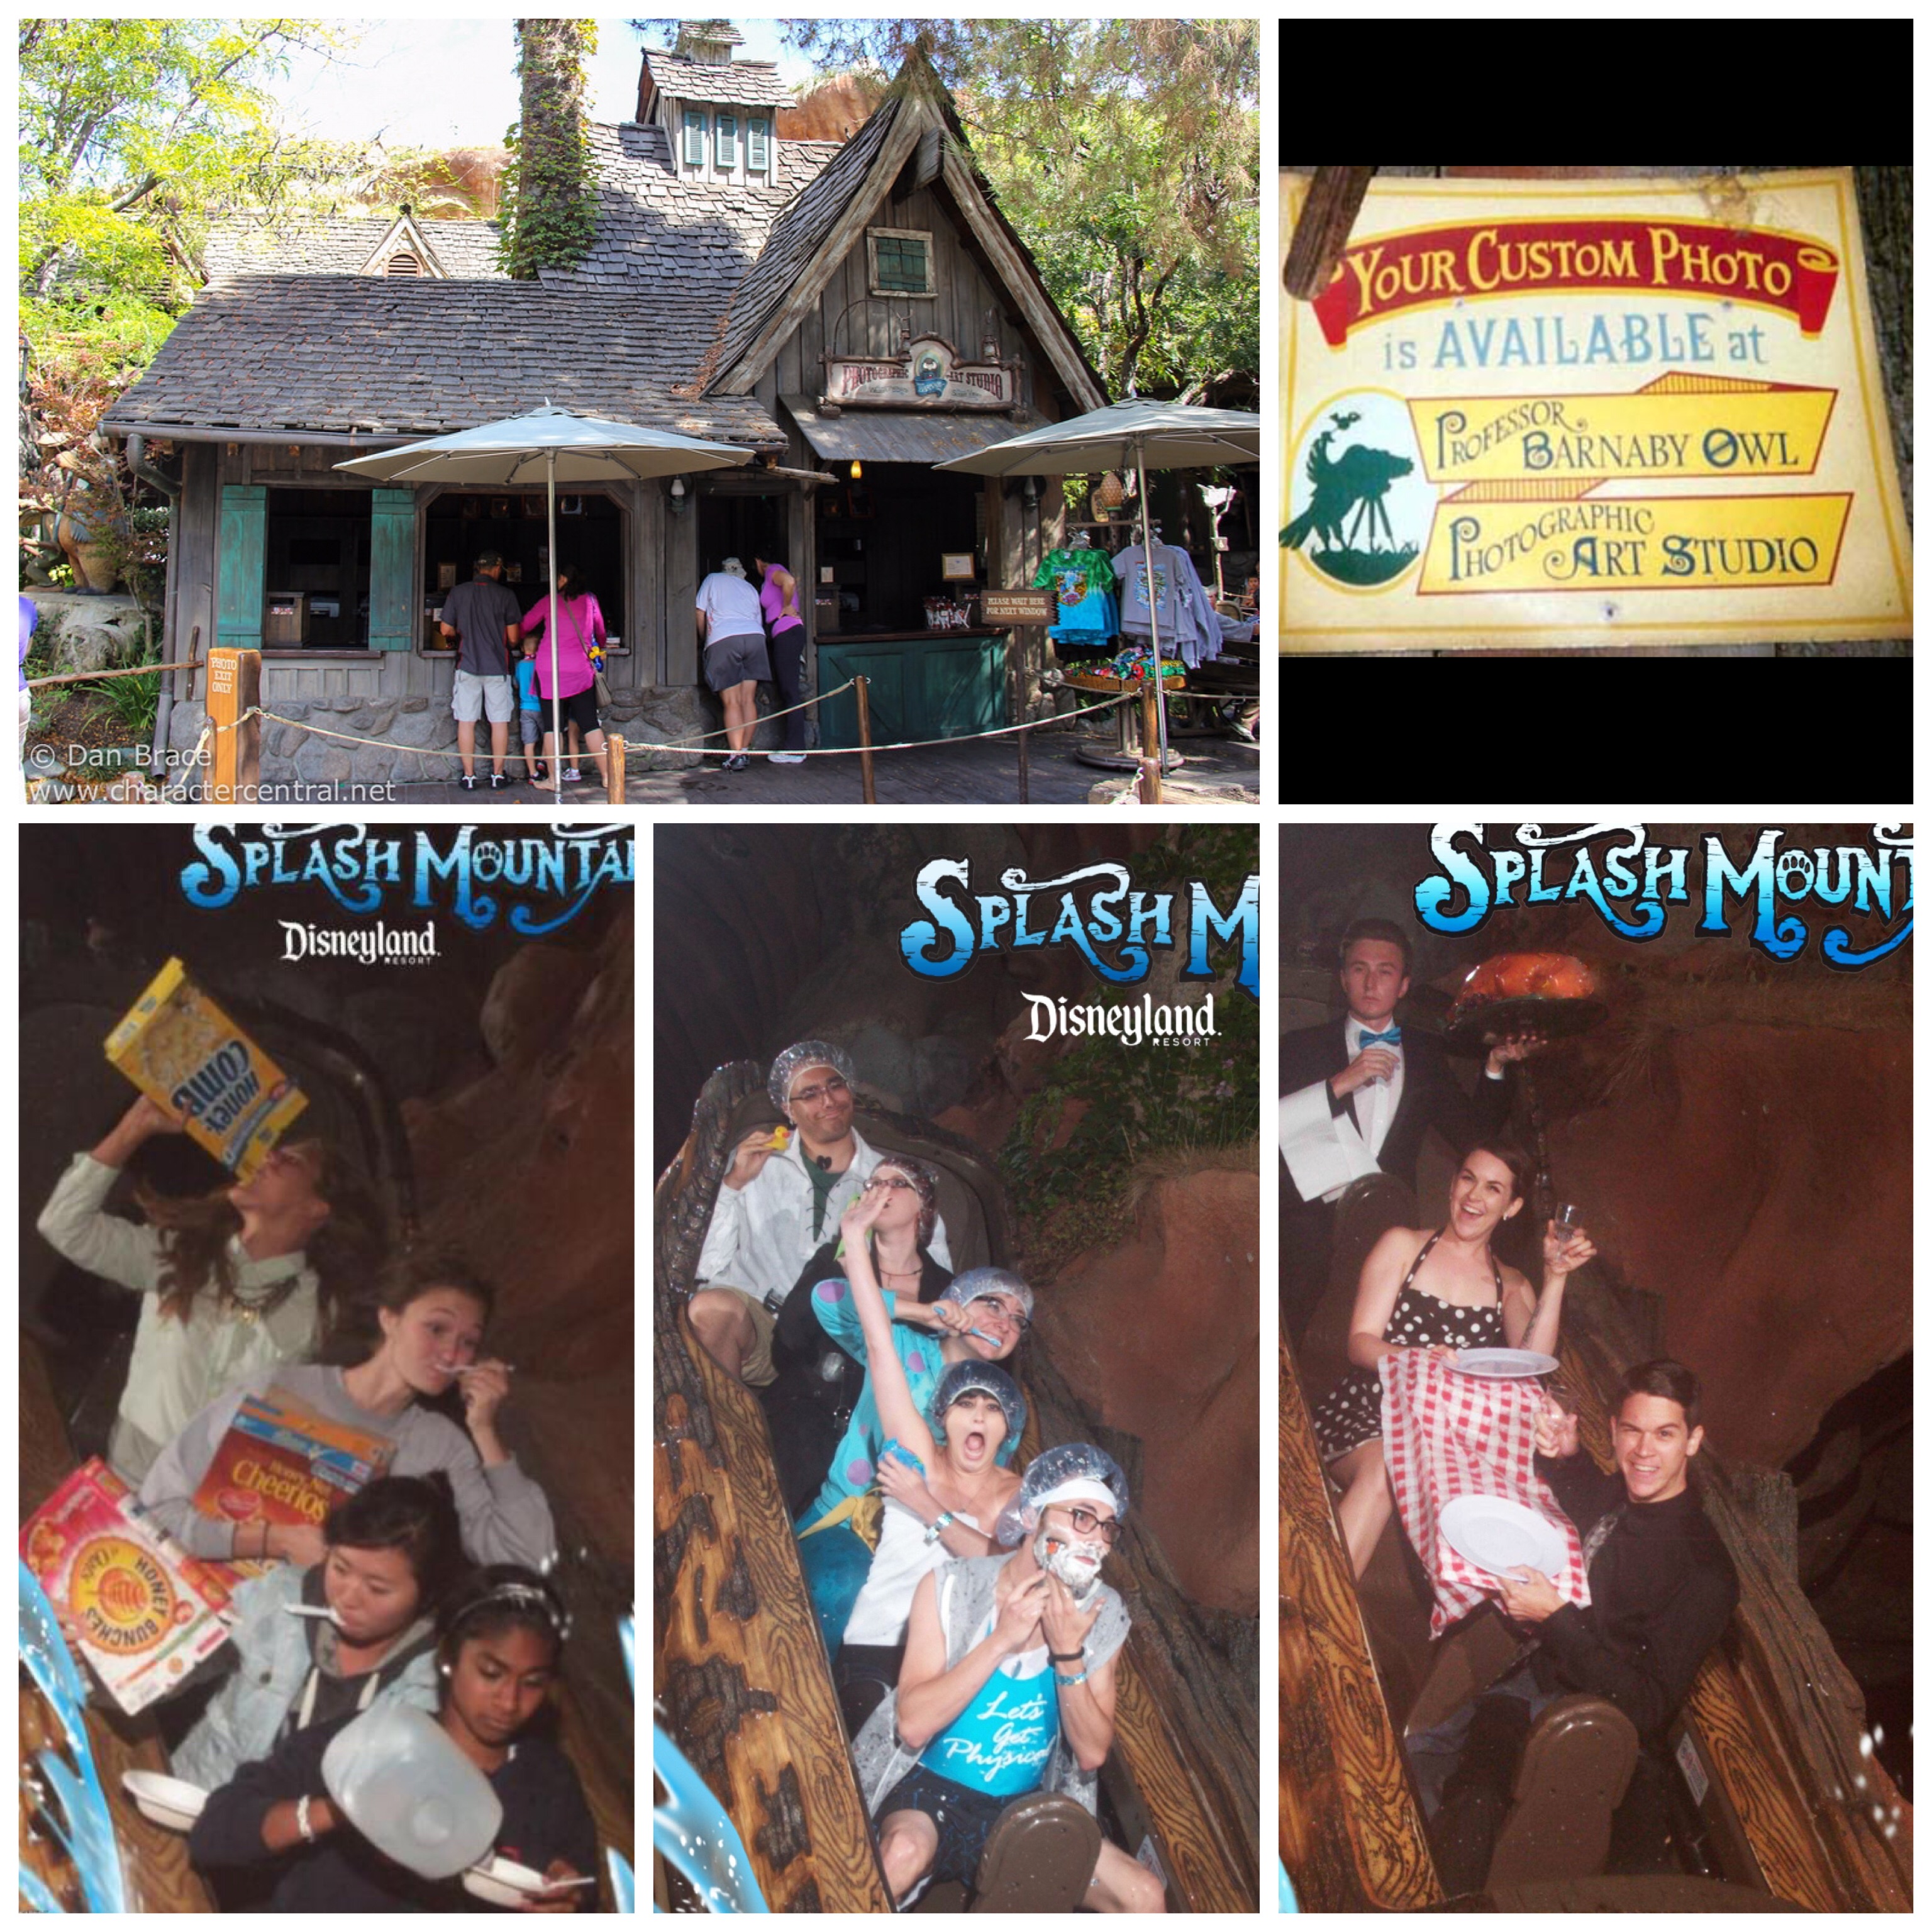 Today marks the th Anniversary of Splash Mountain's